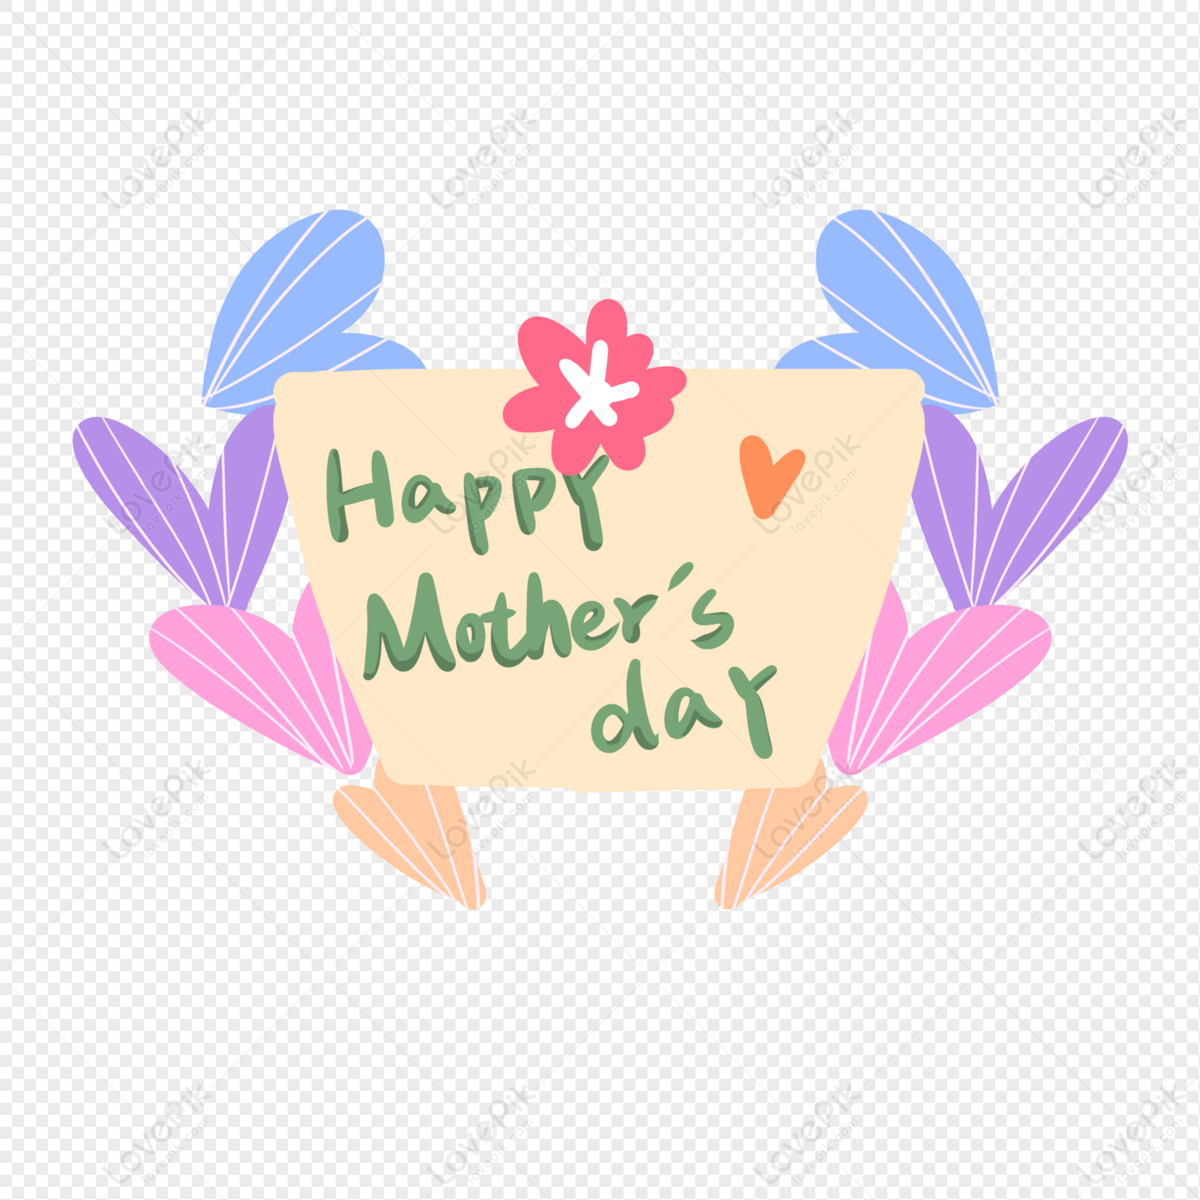 Cartoon Mothers Day Slogan PNG White Transparent And Clipart Image For Free  Download - Lovepik | 401082572